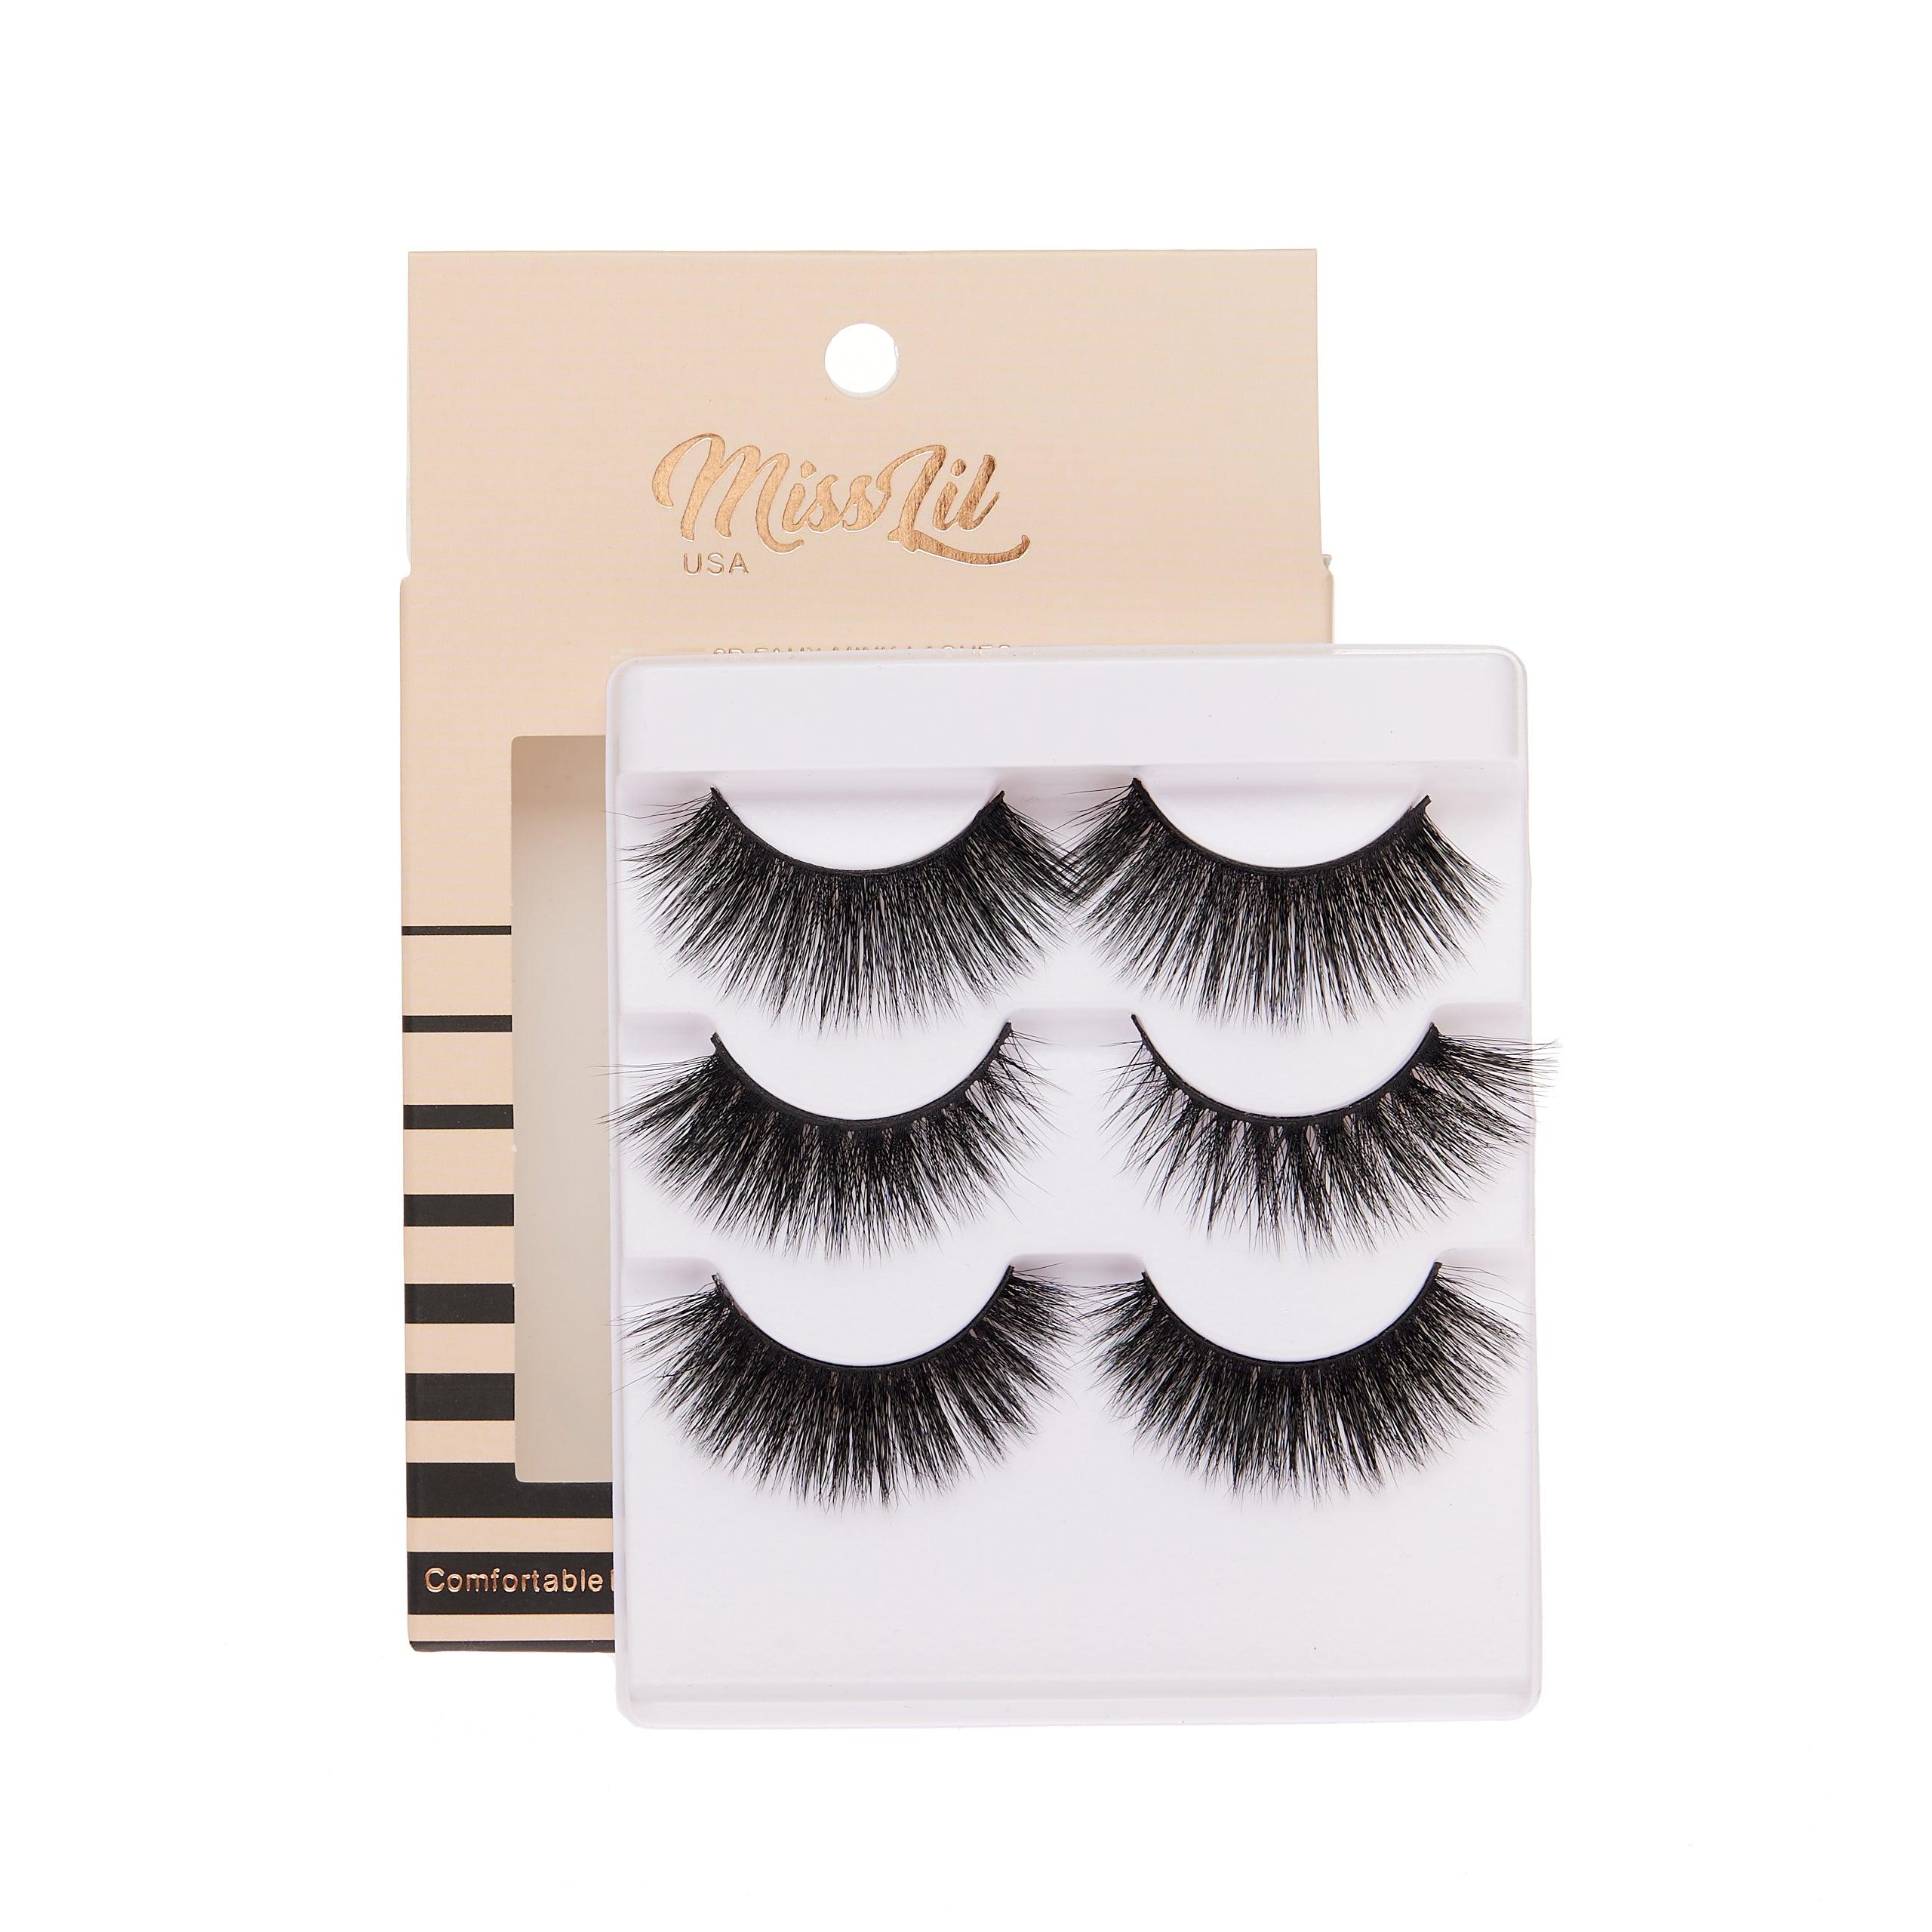 3-Pair Faux 9D Mink Eyelashes - Luxury Collection #18 - Pack of 3 - Miss Lil USA